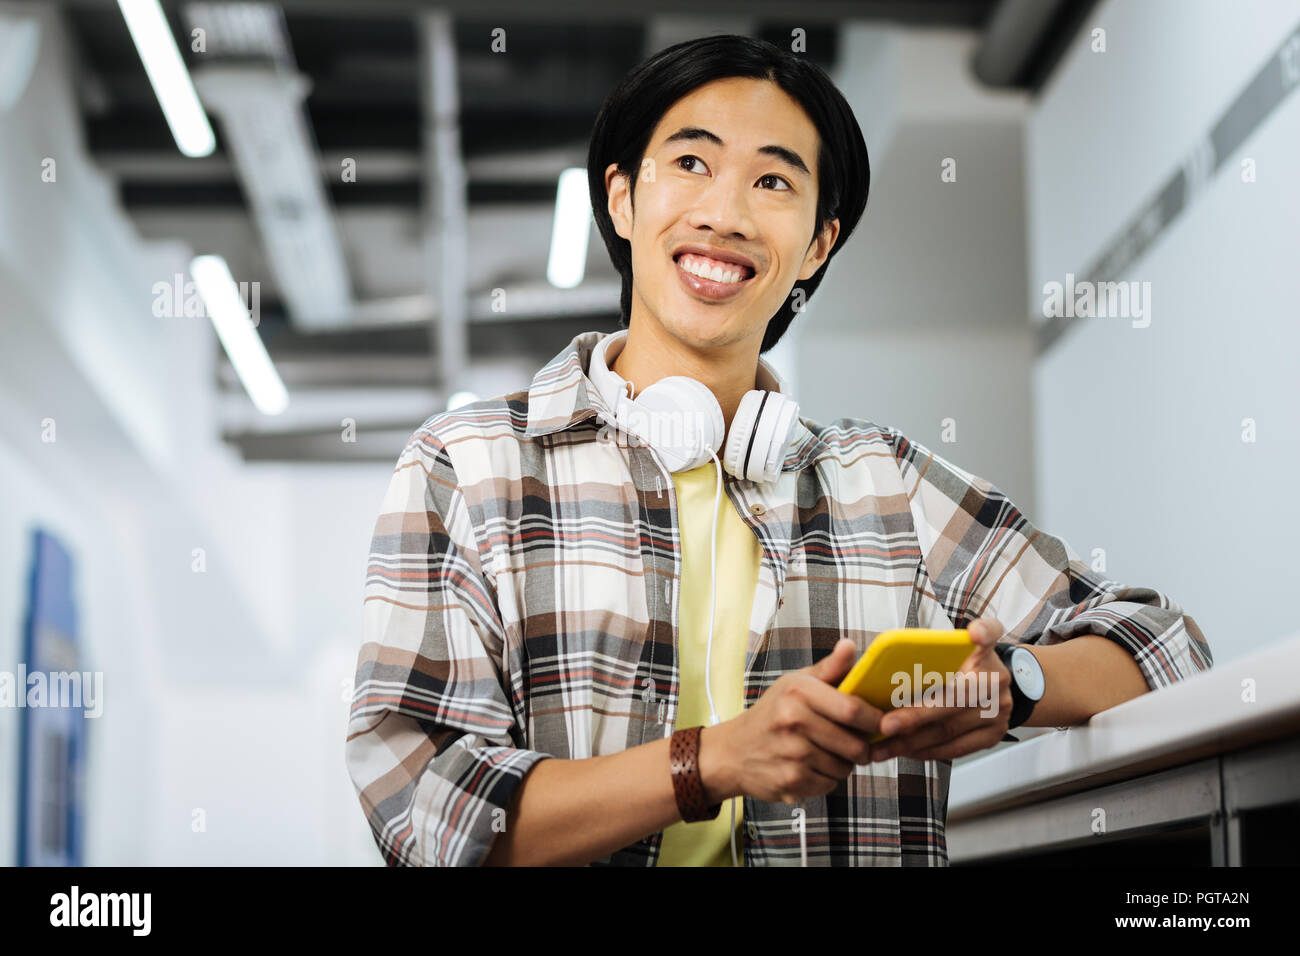 Happy Asian man smiling and holding his yellow gadget Stock Photo